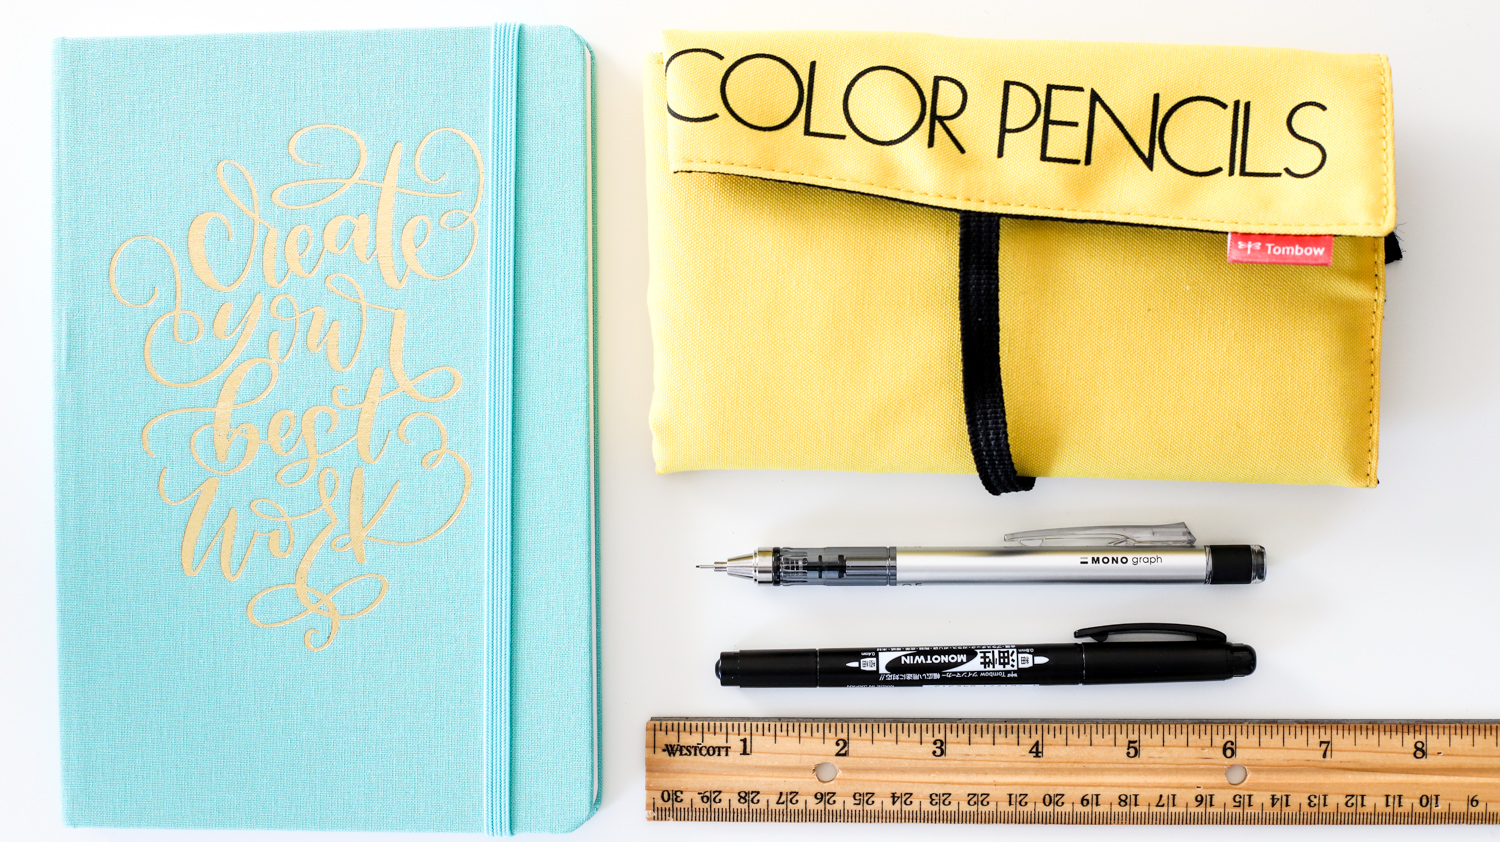 How to create an Ombre Cornered Journal with 1500 Colored Pencils by Danielle Webb @sprinklesofzeal #Journaling #coloredpencils #tombowusa #Lettering